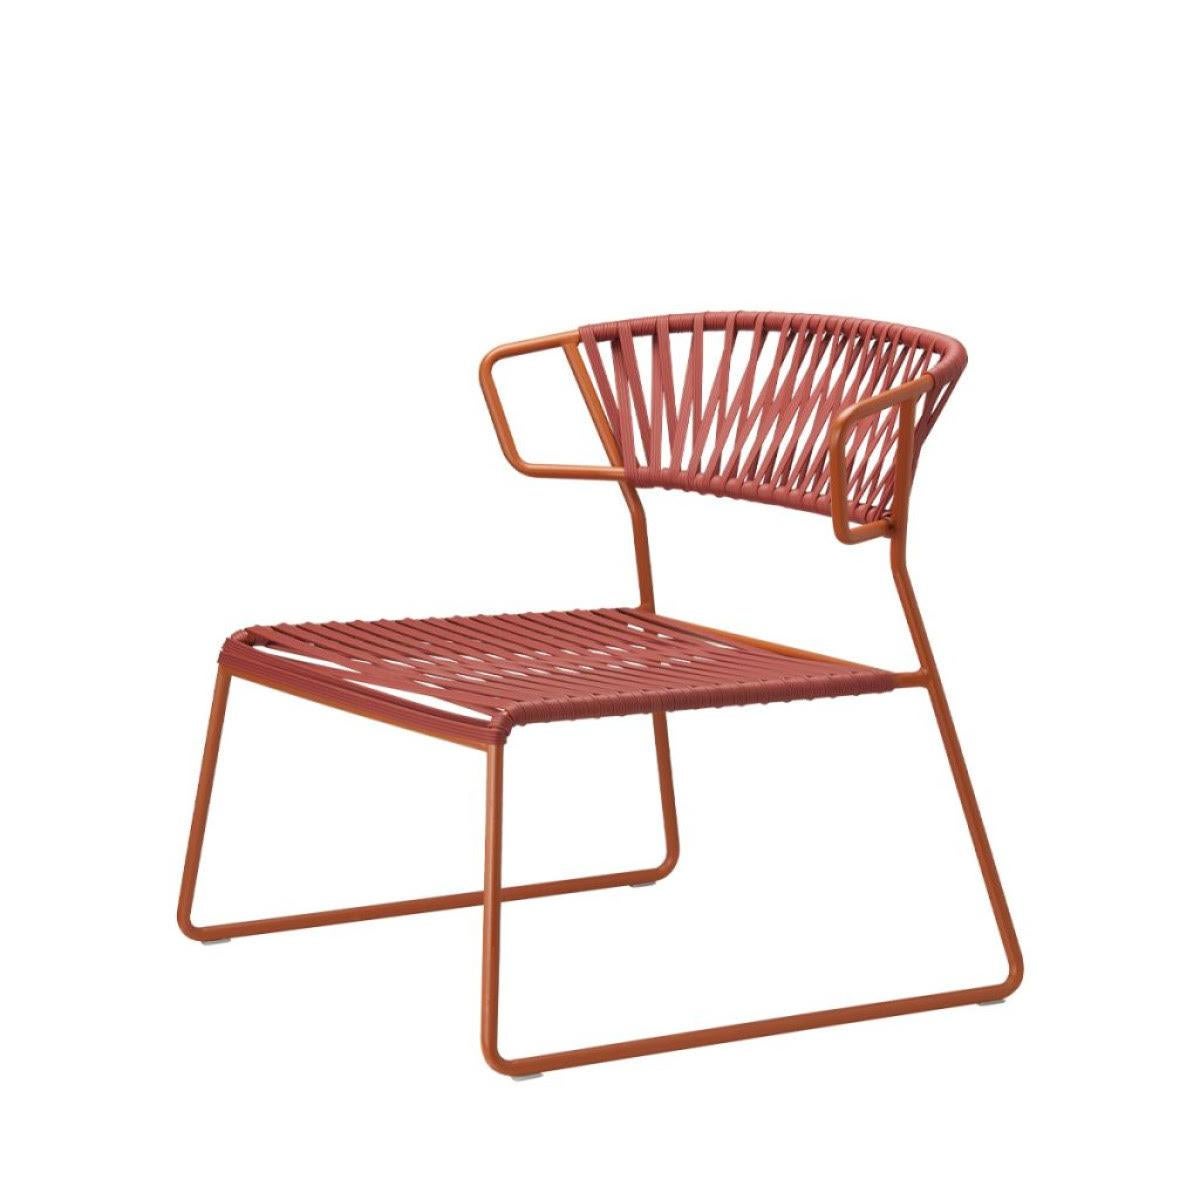 Contemporary Modern Pink Terracotta Armchair Outdoor or Indoor in Metal and Ropes, 21 century For Sale